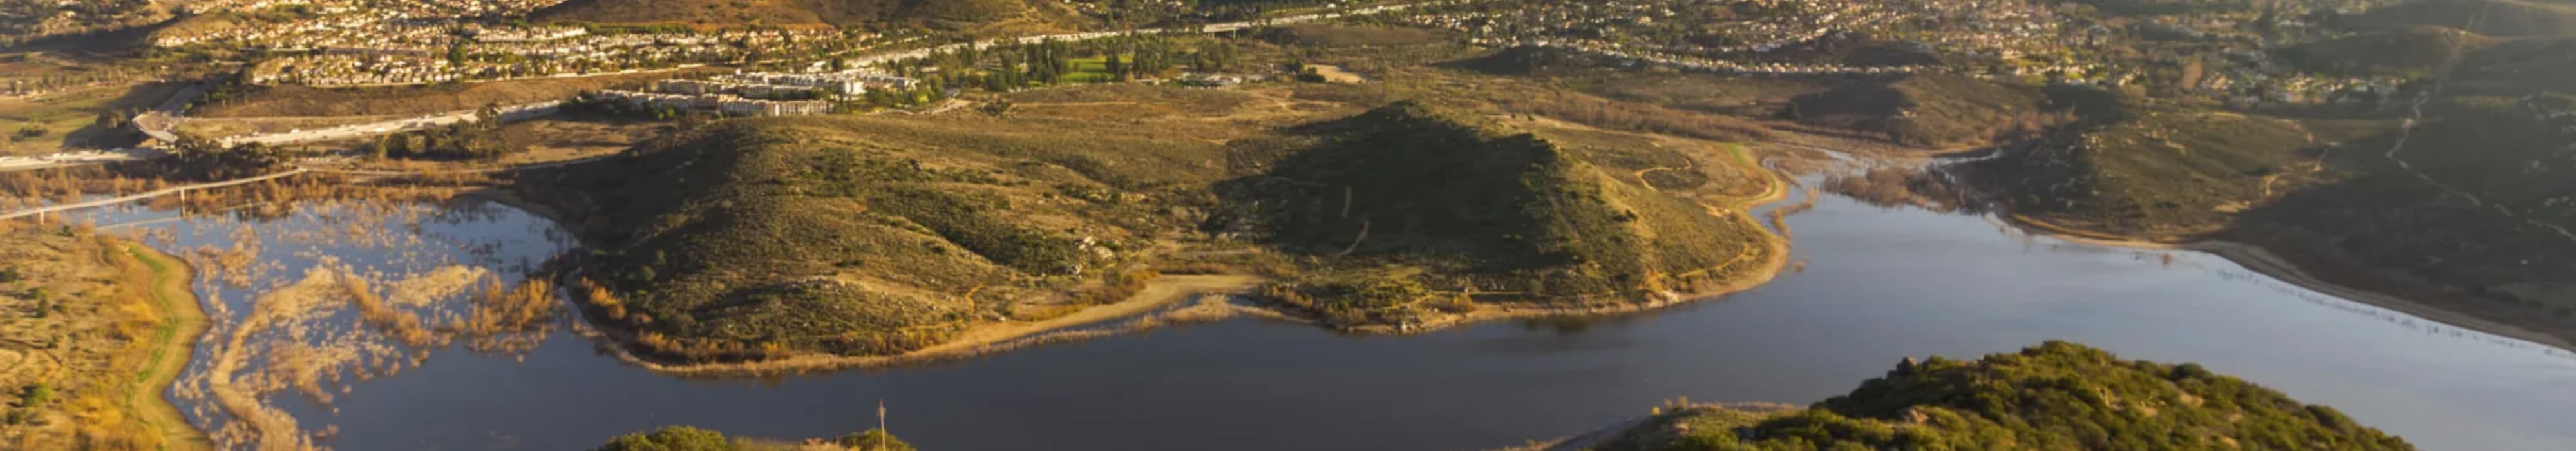 A view of Lake Hodges near North County Self Storage in Escondido, California